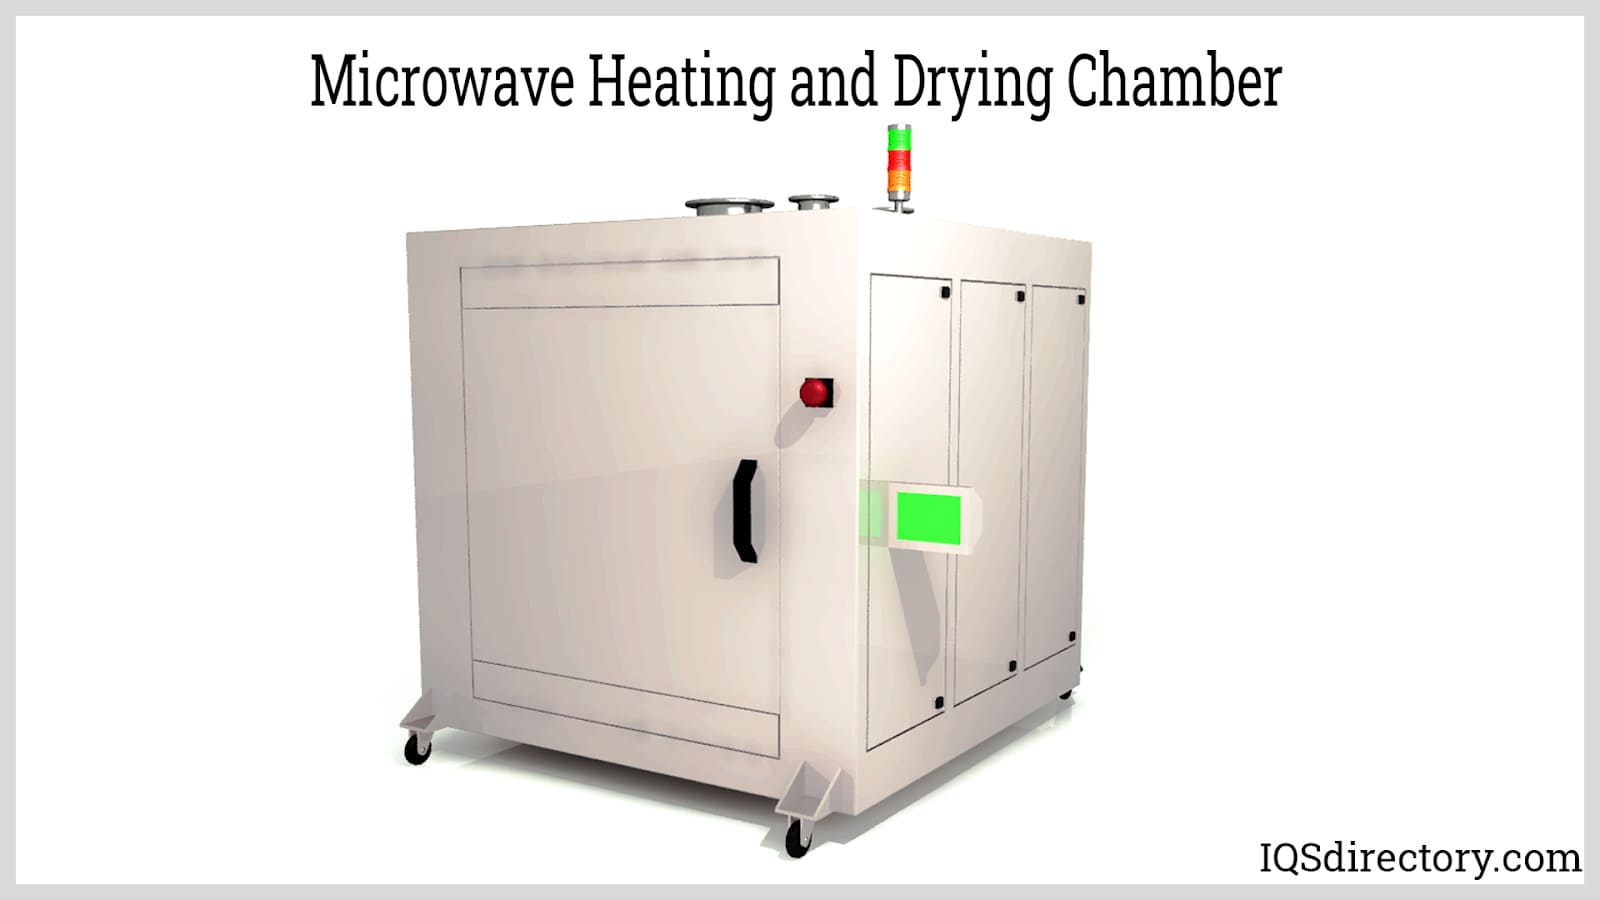 Microwave Heating and Drying Chamber